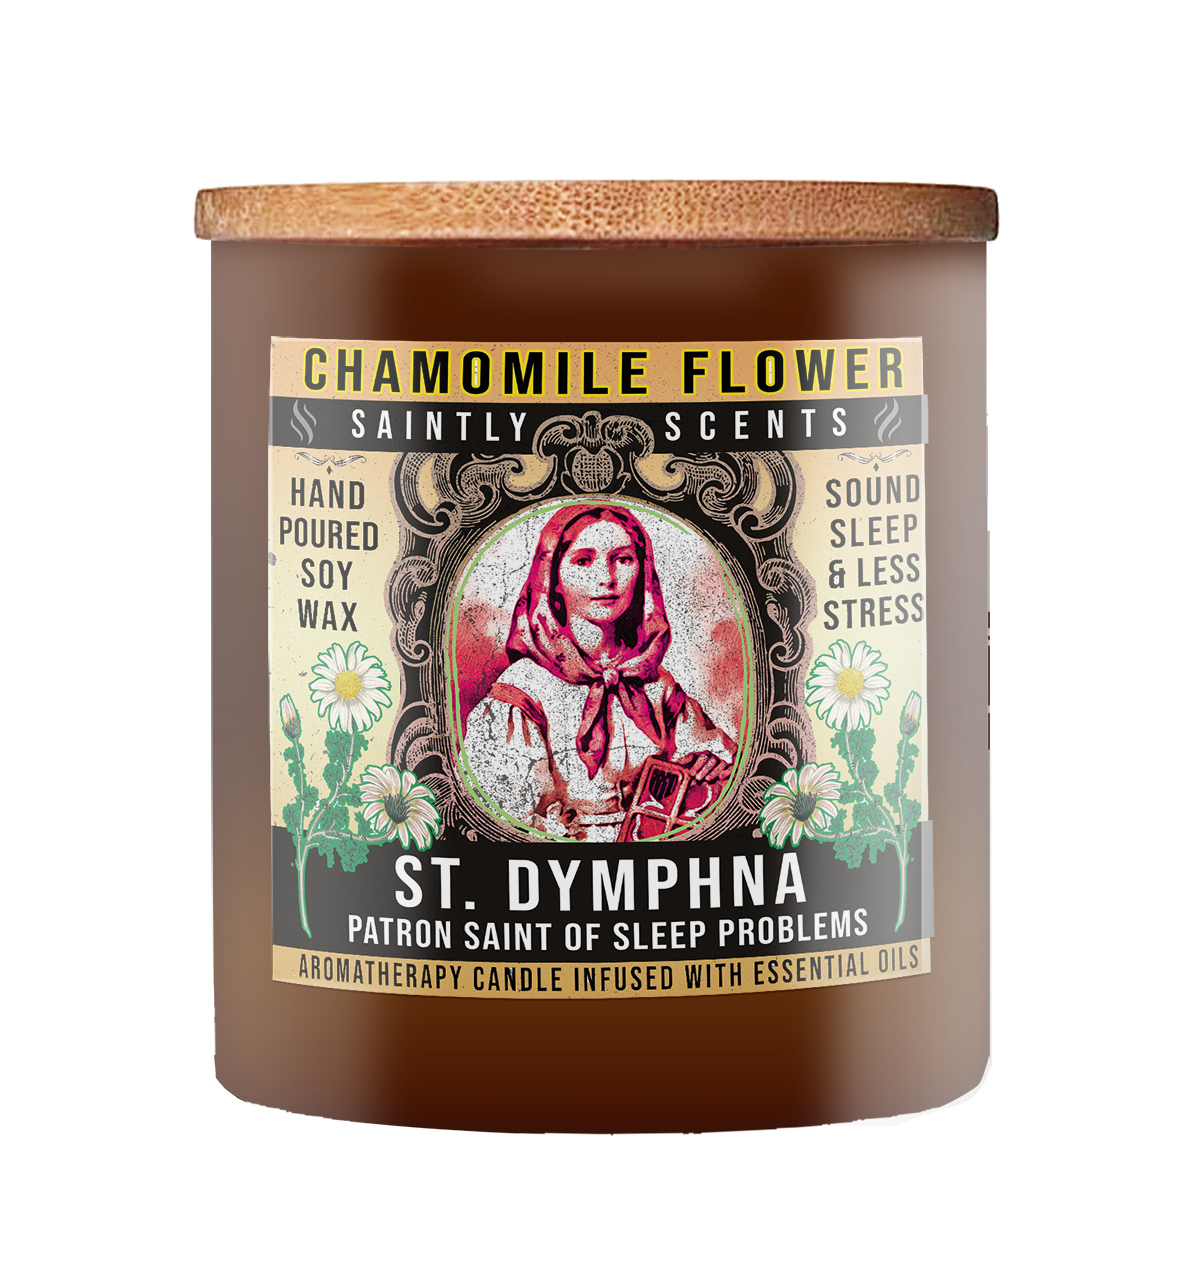 St. Dymphna Chamomile Flower Scented Candle